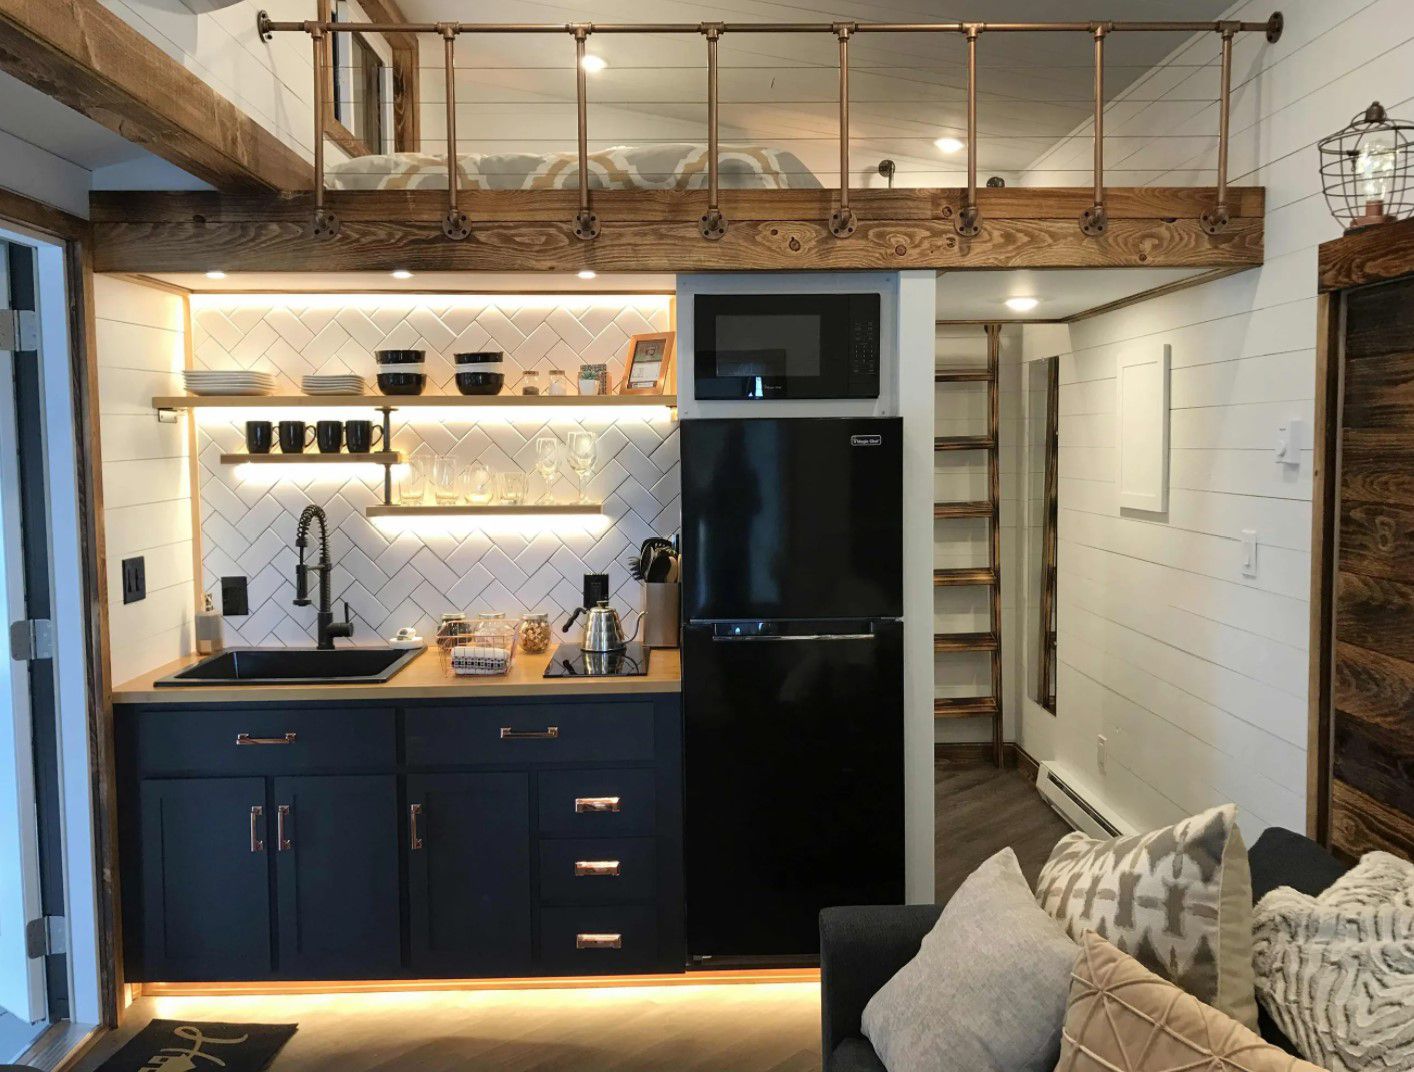 <p>Before you jump on Airbnb to find a tiny-house rental to stay in, there are a couple of things to keep in mind. </p><h3>Beware price variation</h3><p>Many tiny homes are indeed more affordable than your average Airbnb house. But that doesn’t mean they’re all cheap to rent. </p><p>Prices vary greatly depending on the location, level of luxury, and amenities. You might pay $100 a night for a tiny house in the suburbs but $1,000 a night for one in the middle of New York City. </p><p>Don’t let price alone dictate which house you choose. Just because one is much cheaper doesn’t mean it won’t be a great vacation. </p><h3>Check the location</h3><p>You might crave a true escape into the woods where you don’t have cell service and no one can bother you. But after a day or two, you’ll want some civilization and maybe something to do. </p><p>Once you’ve found a tiny house you love, check on the location to see what’s in the area. Many tiny homes are in trailer and <a href="https://www.lifeupswing.com/rv-park-investment/">RV parks</a>; others are in the city; some are in the middle of nowhere. Make sure you know exactly where you are going. </p><h3>The “tiny” size varies</h3><p>The average tiny home is around 400 square feet. But the definition of “tiny” varies a lot. Some tiny homes can comfortably accommodate a family, whereas others are built for just one or two people. </p><p>Check the square footage and available sleeping areas to ensure the tiny size won’t cause headaches. </p><h3>Make sure the layout is suitable</h3><p>When you book a standard Airbnb, you get a bedroom, a bathroom, a kitchen, and a living space. Tiny homes really don’t conform to standard layouts, so check to see what you’re getting. </p><p>For example, loft bedrooms are common in tiny homes. It might not be for you if you don’t think you can climb a ladder at night. Others don’t have a separate living room, so if you’re looking for space away from other guests, check the layout. </p><p>Let’s take a look at some of the most incredible tiny homes available to rent on Airbnb. </p>